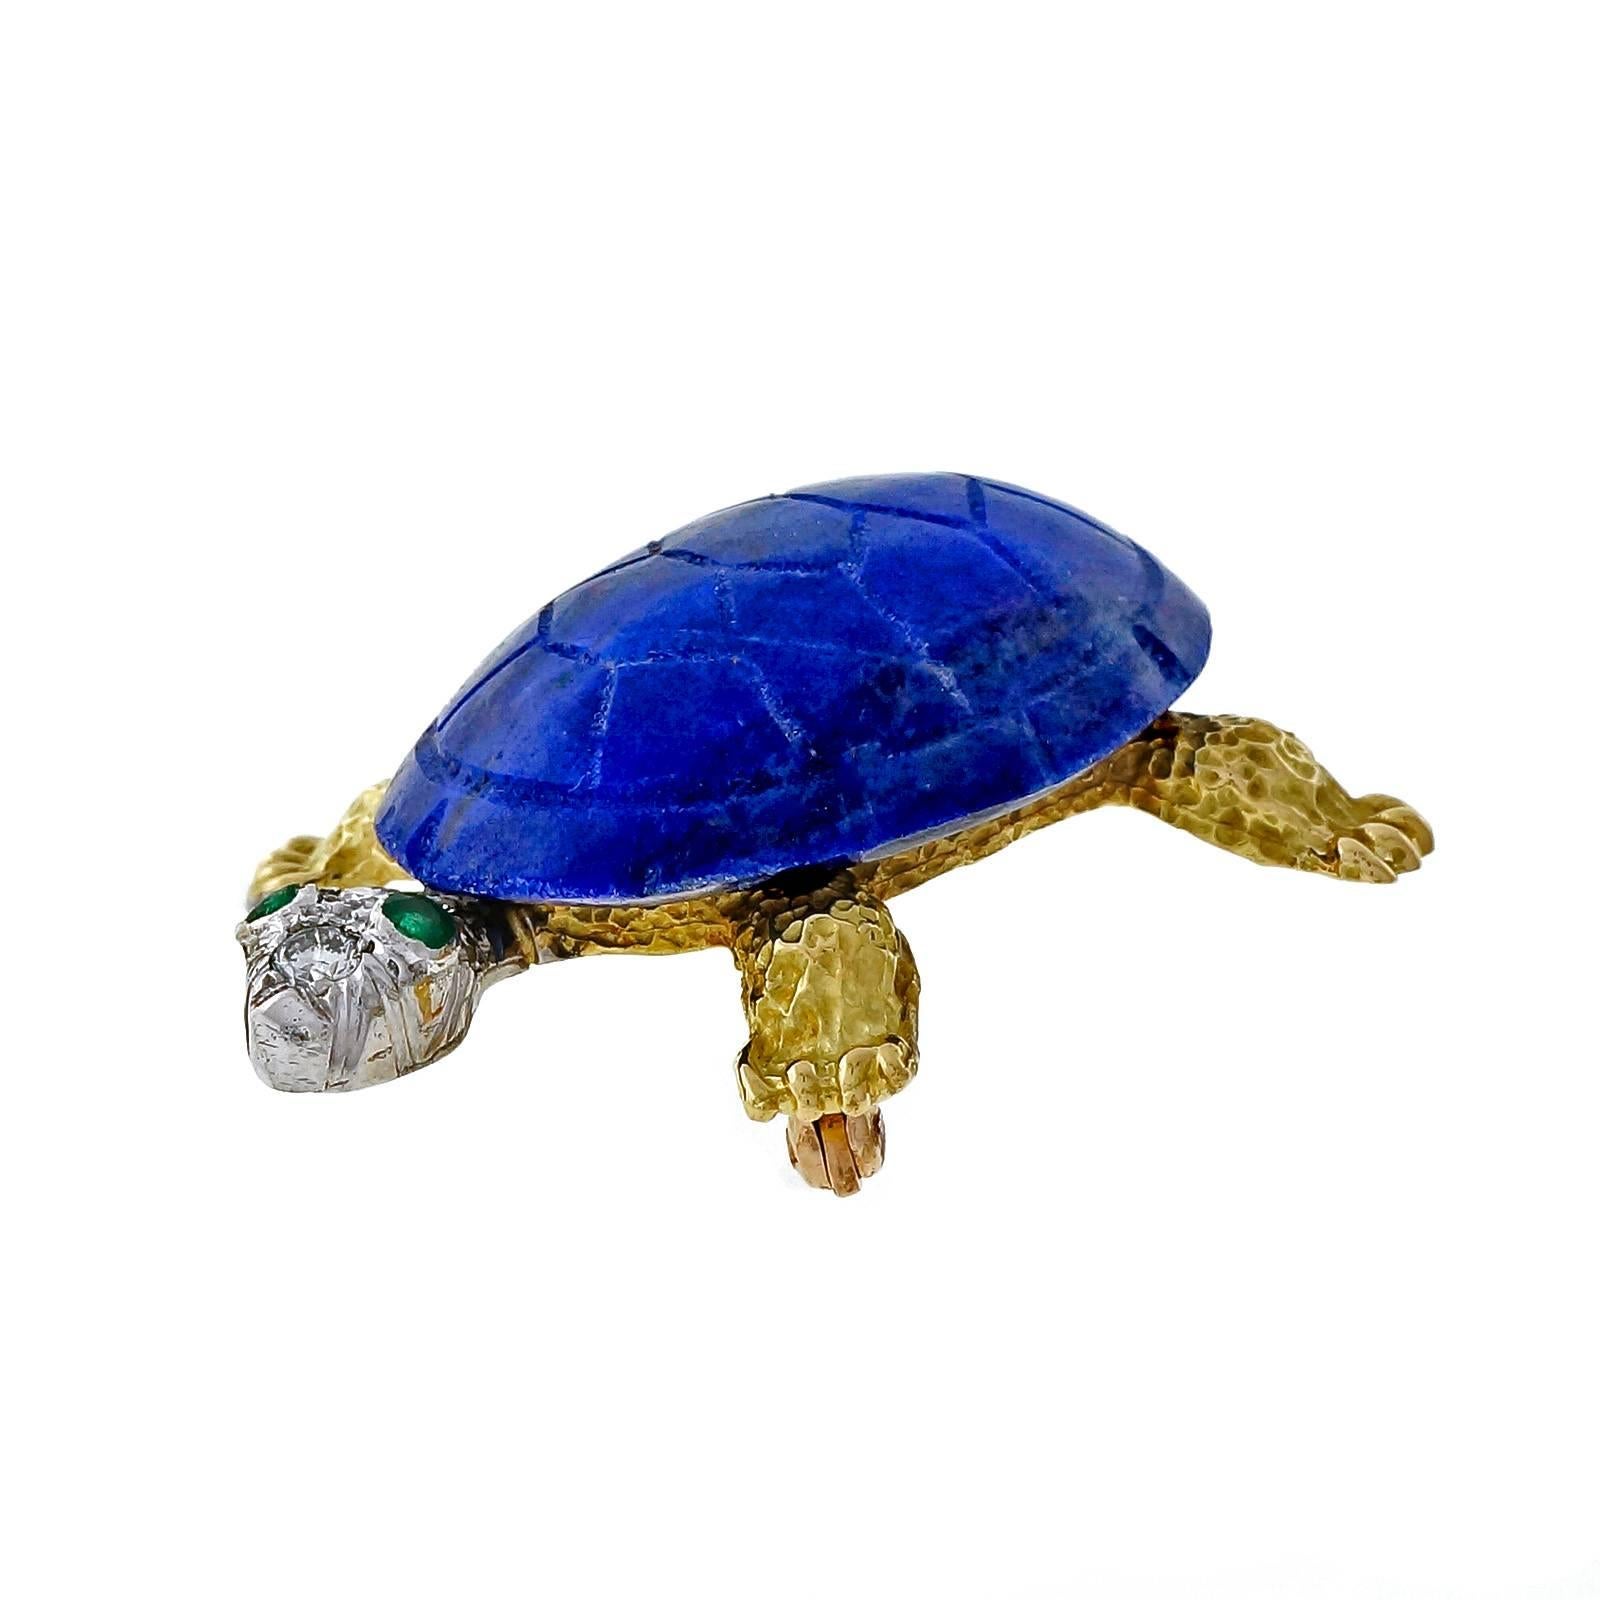 Wonderful 3-D 18k yellow gold Turtle pin with natural Lapis shell, white gold head and yellow gold body. Emerald eyes with diamond head and tail.

1 oval carved blue Lapis 26.92 x 20.70 x 7.20mm
2 round Emeralds, approx. total weight .06cts
9